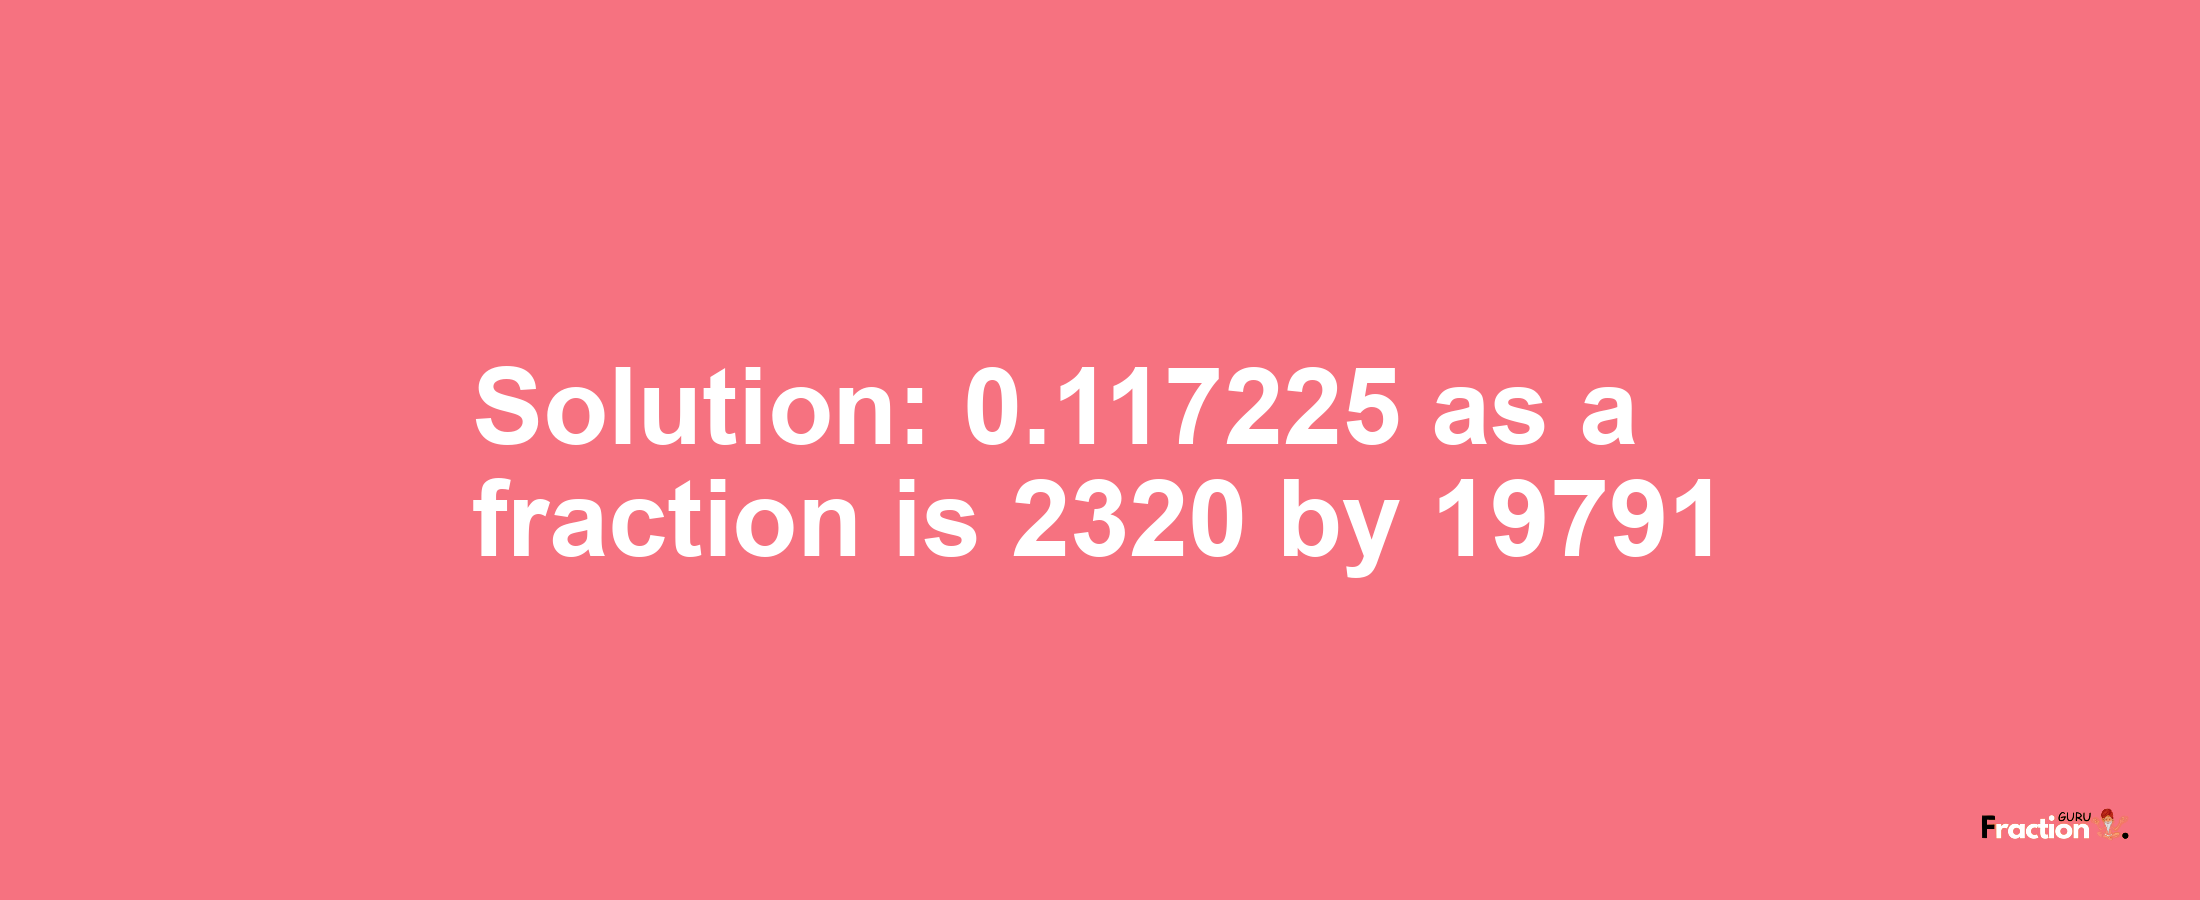 Solution:0.117225 as a fraction is 2320/19791